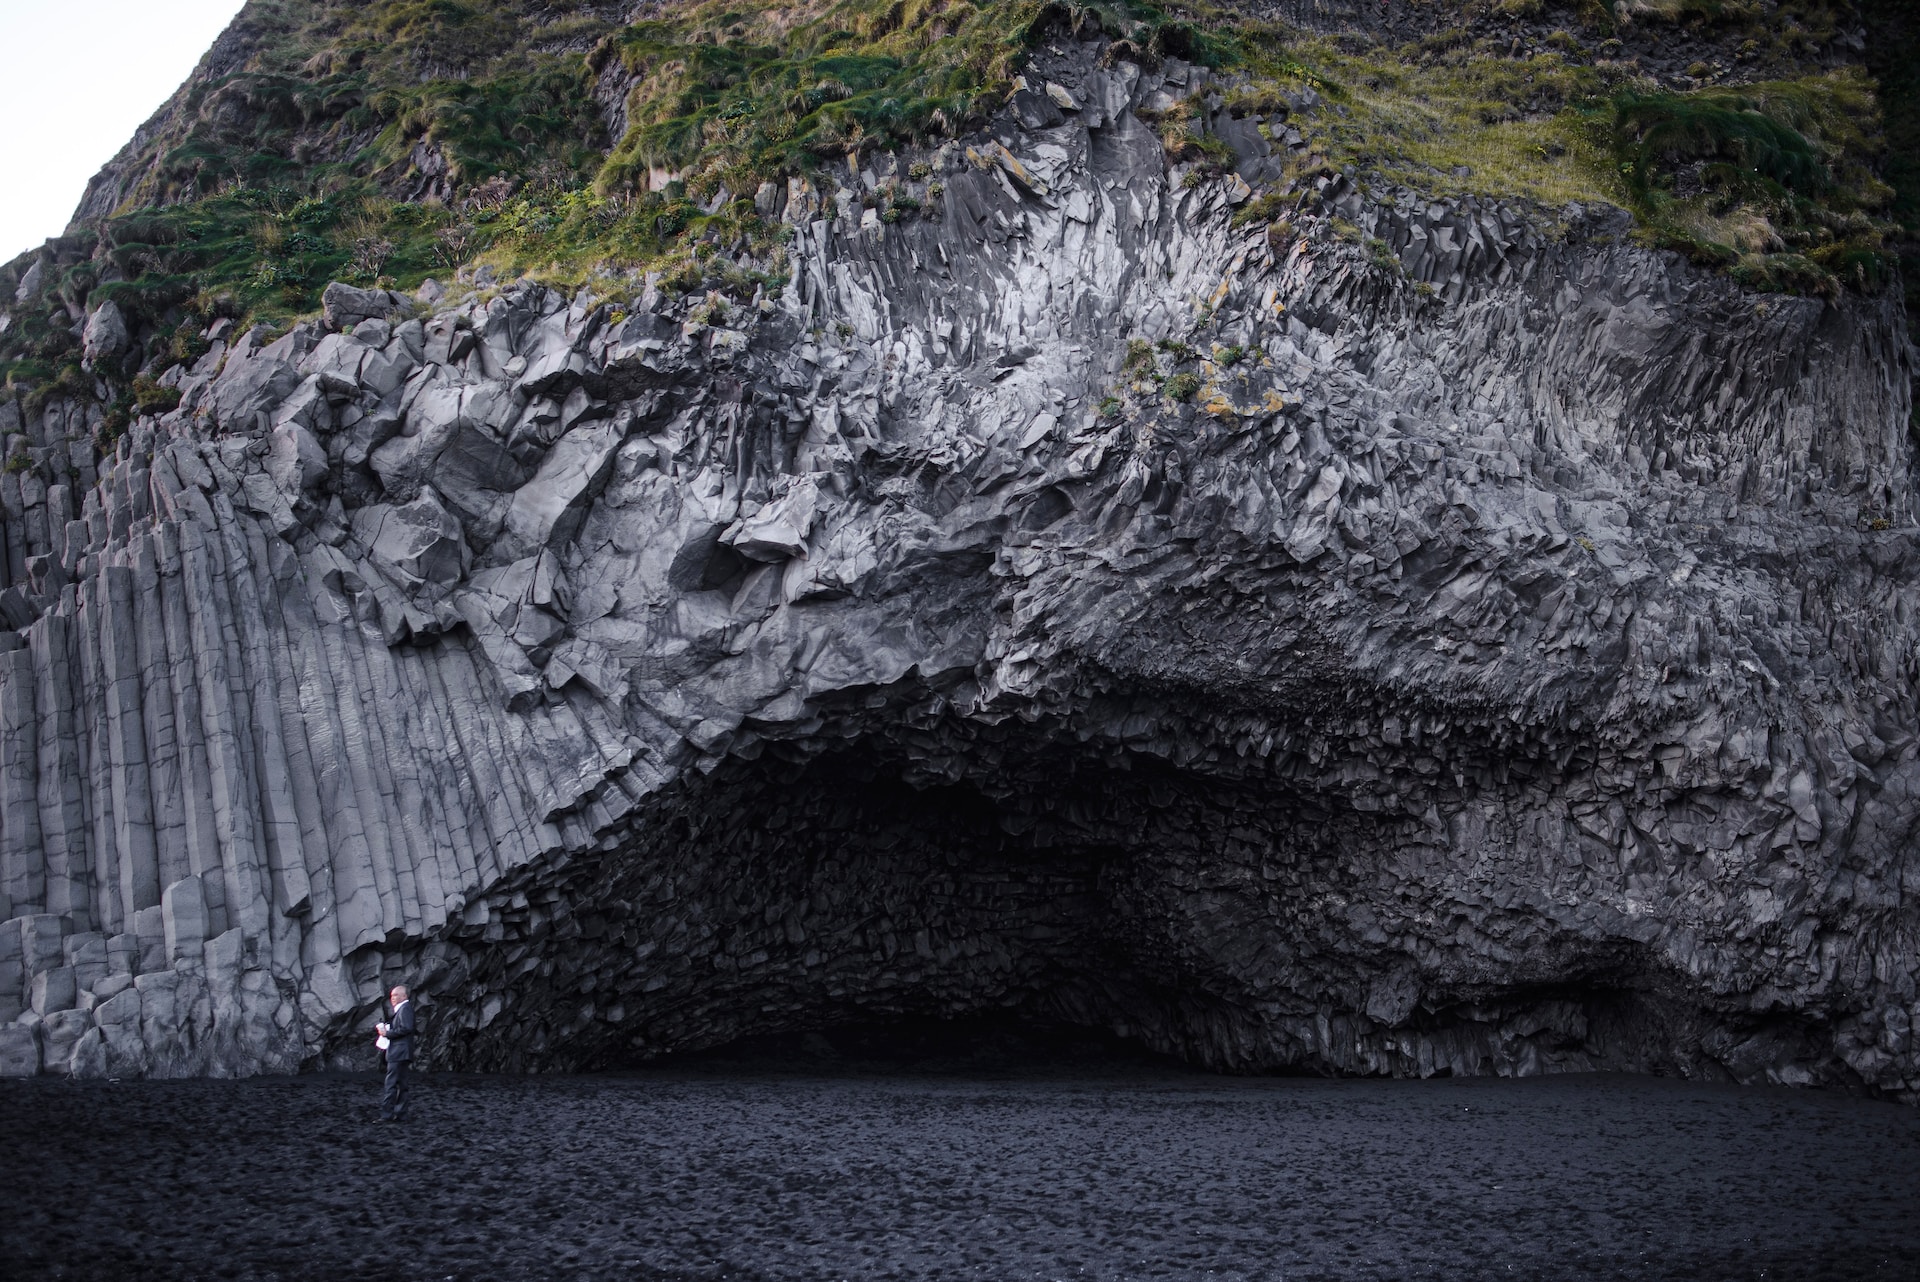 A rock overhang and a cave along the shore in Iceland.